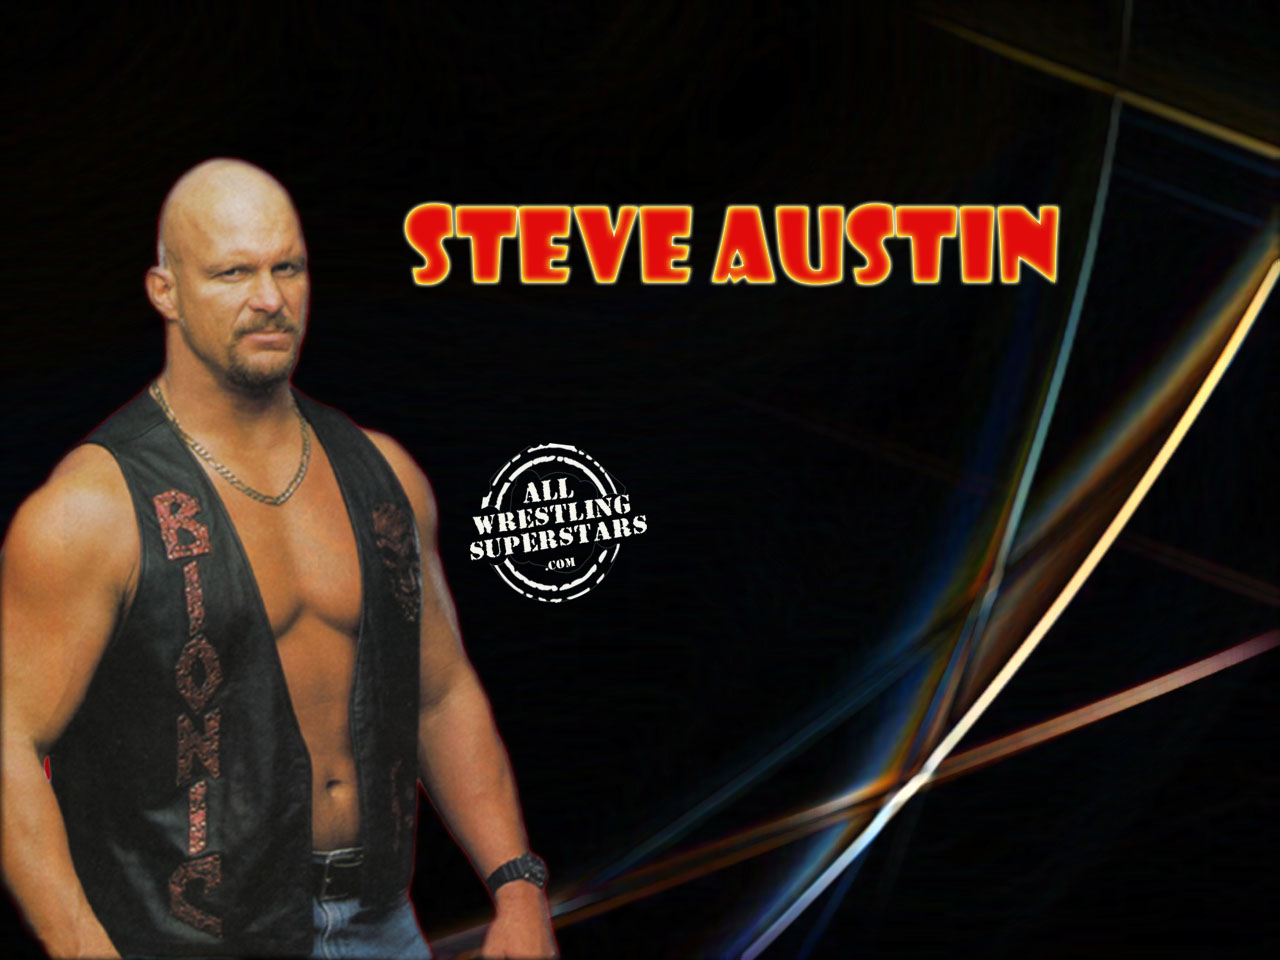 Stone Cold Steve Austin Wallpapers WWE Superstars   Page 2 1280x960